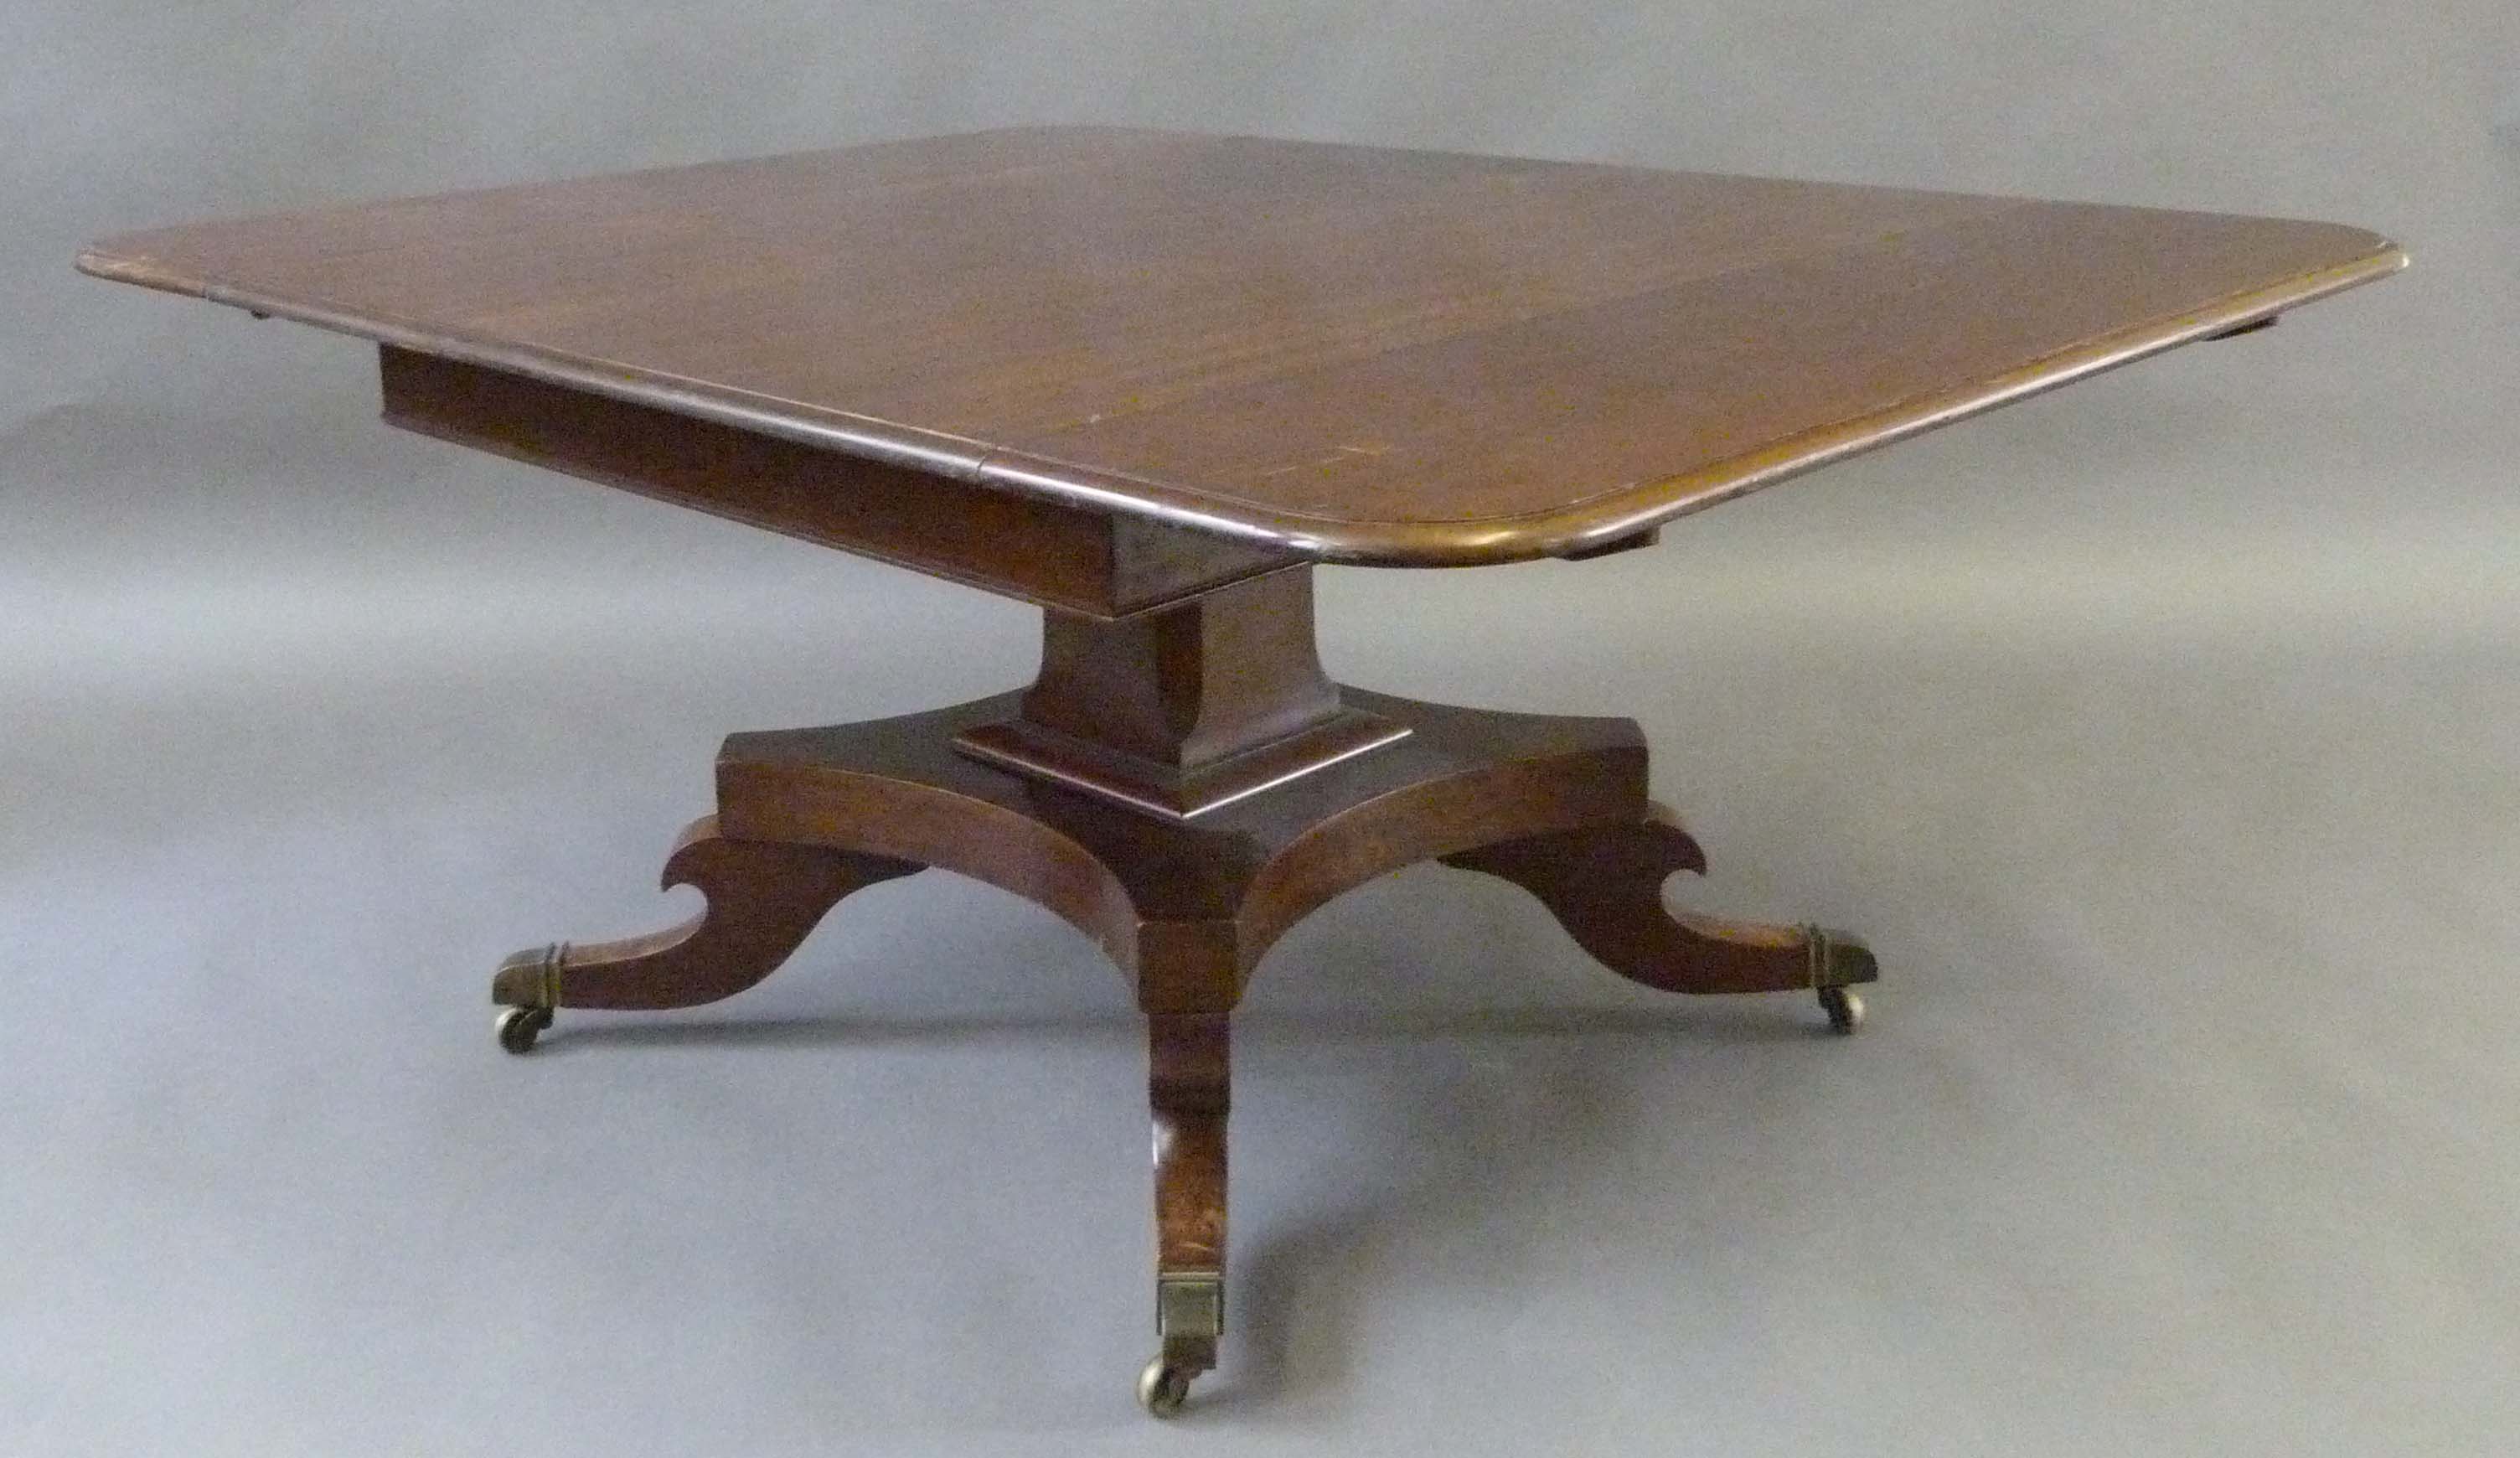 A Regency period mahogany table with two additional leaves, raised on column square and